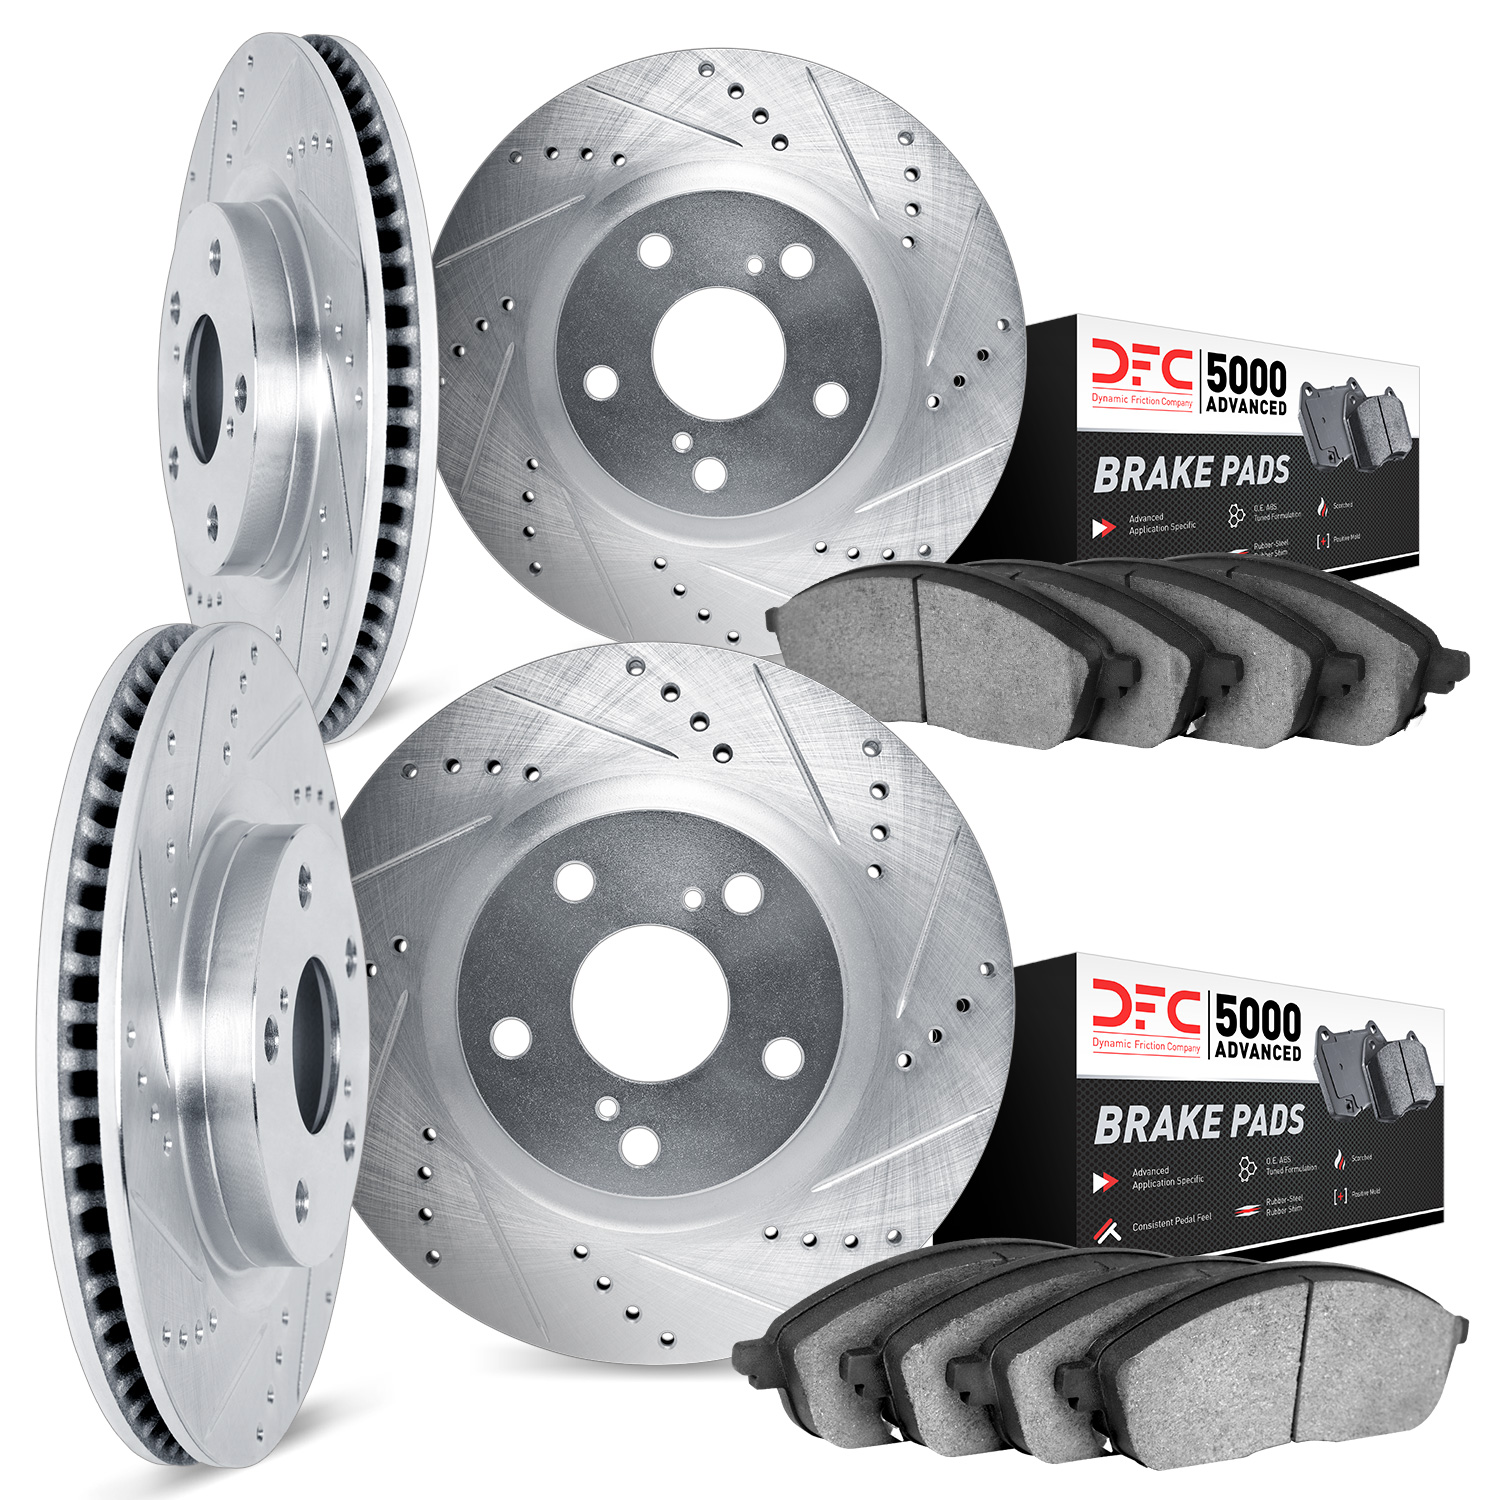 7504-54403 Drilled/Slotted Brake Rotors w/5000 Advanced Brake Pads Kit [Silver], Fits Select Ford/Lincoln/Mercury/Mazda, Positio